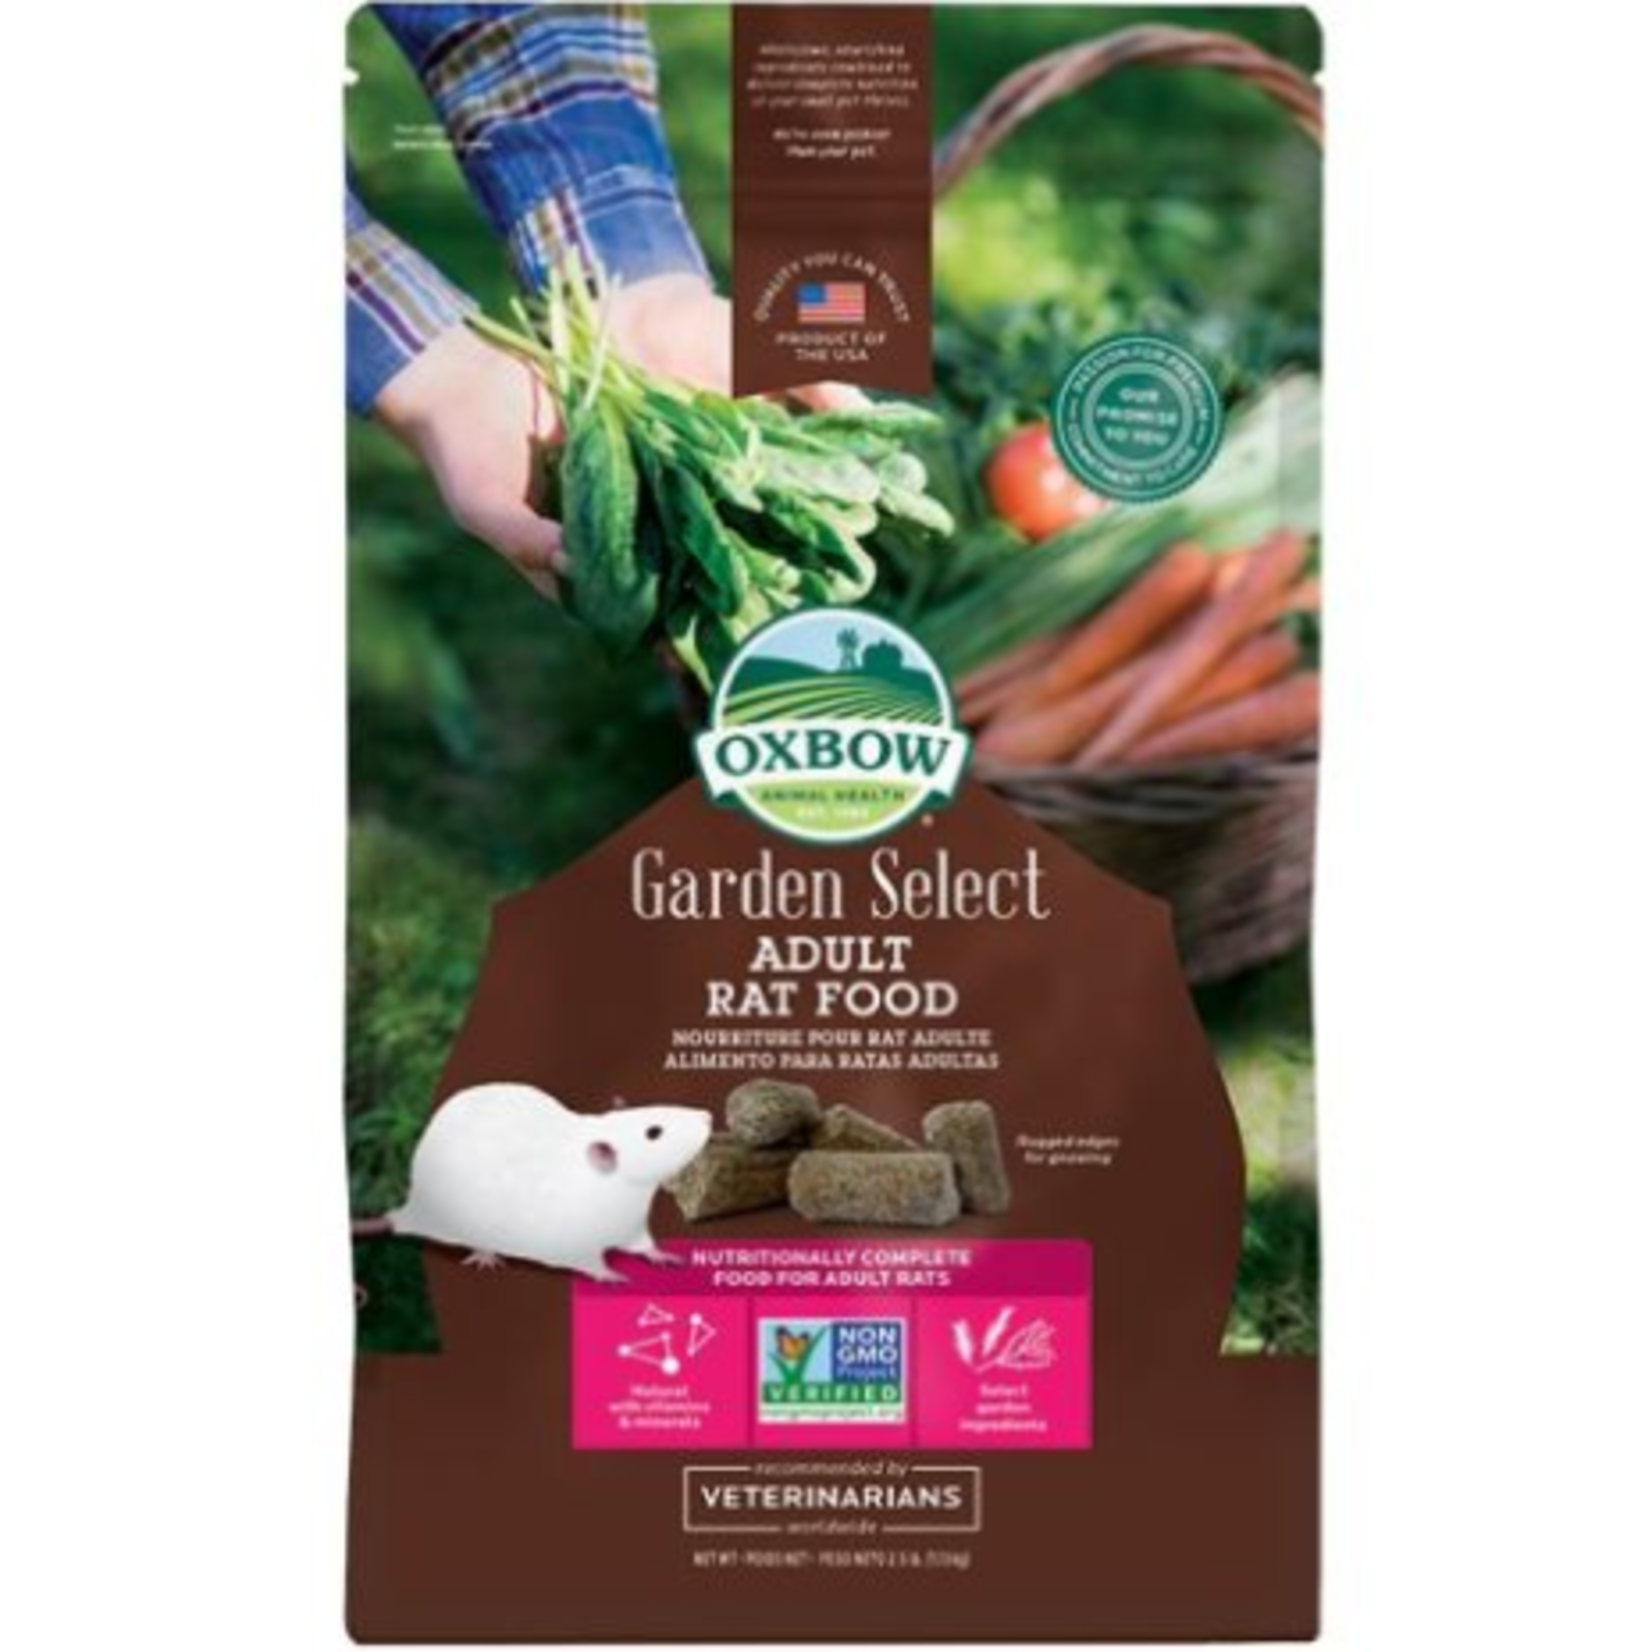 Oxbow Garden Select - Pour rats adultes - 2,5 lbs